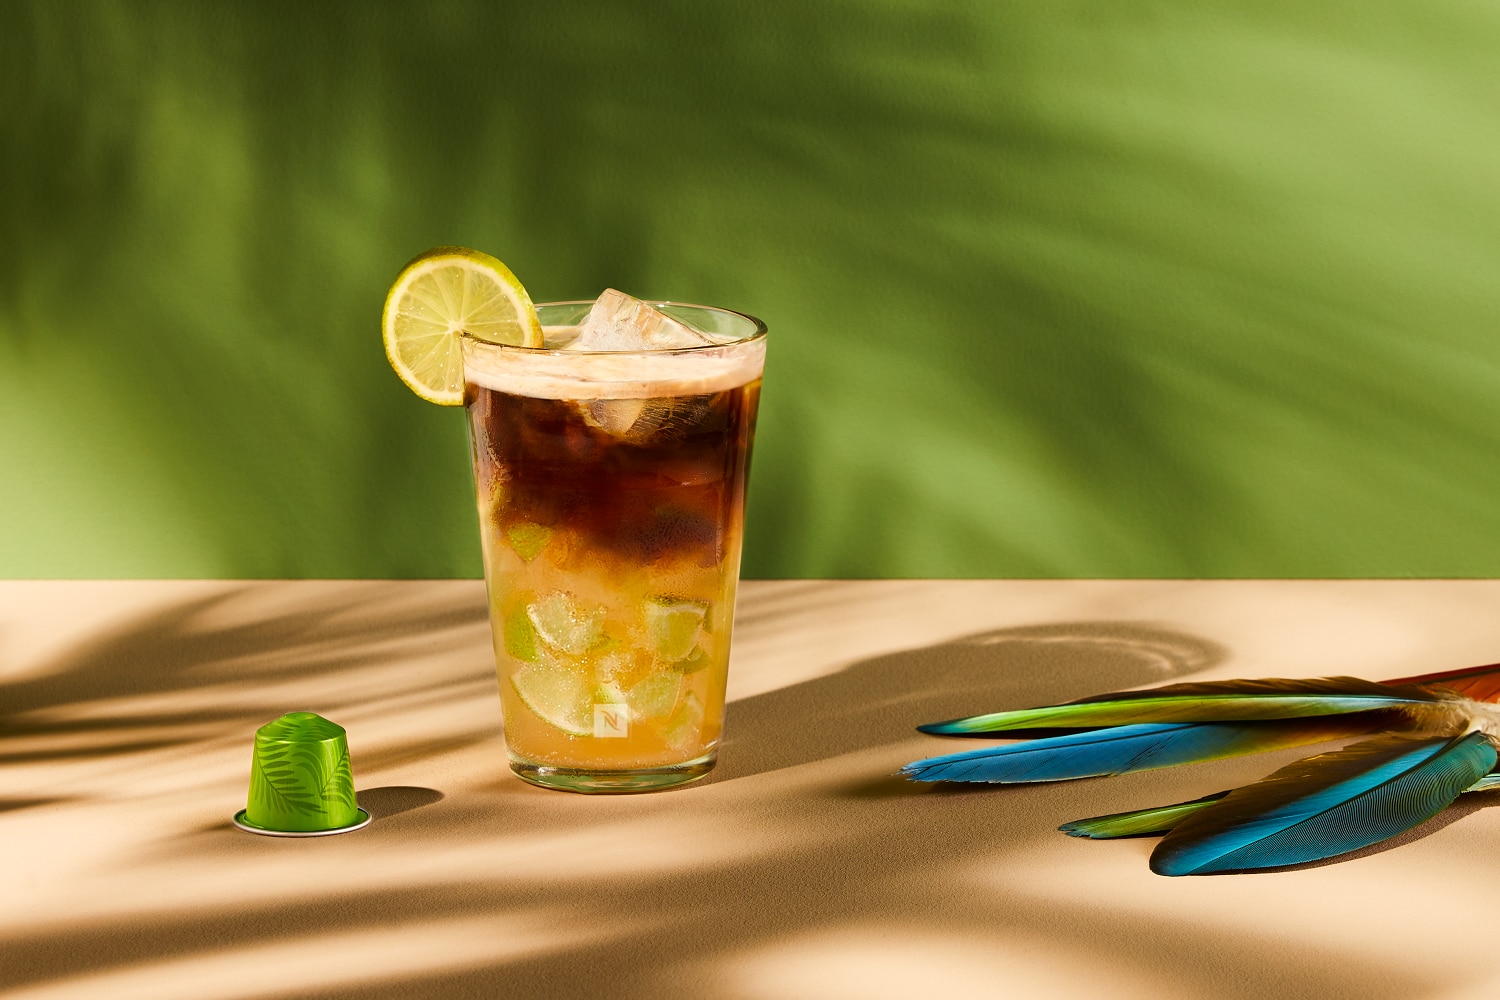 Nespresso brings the tastes of summer with tropical iced coffee flavours